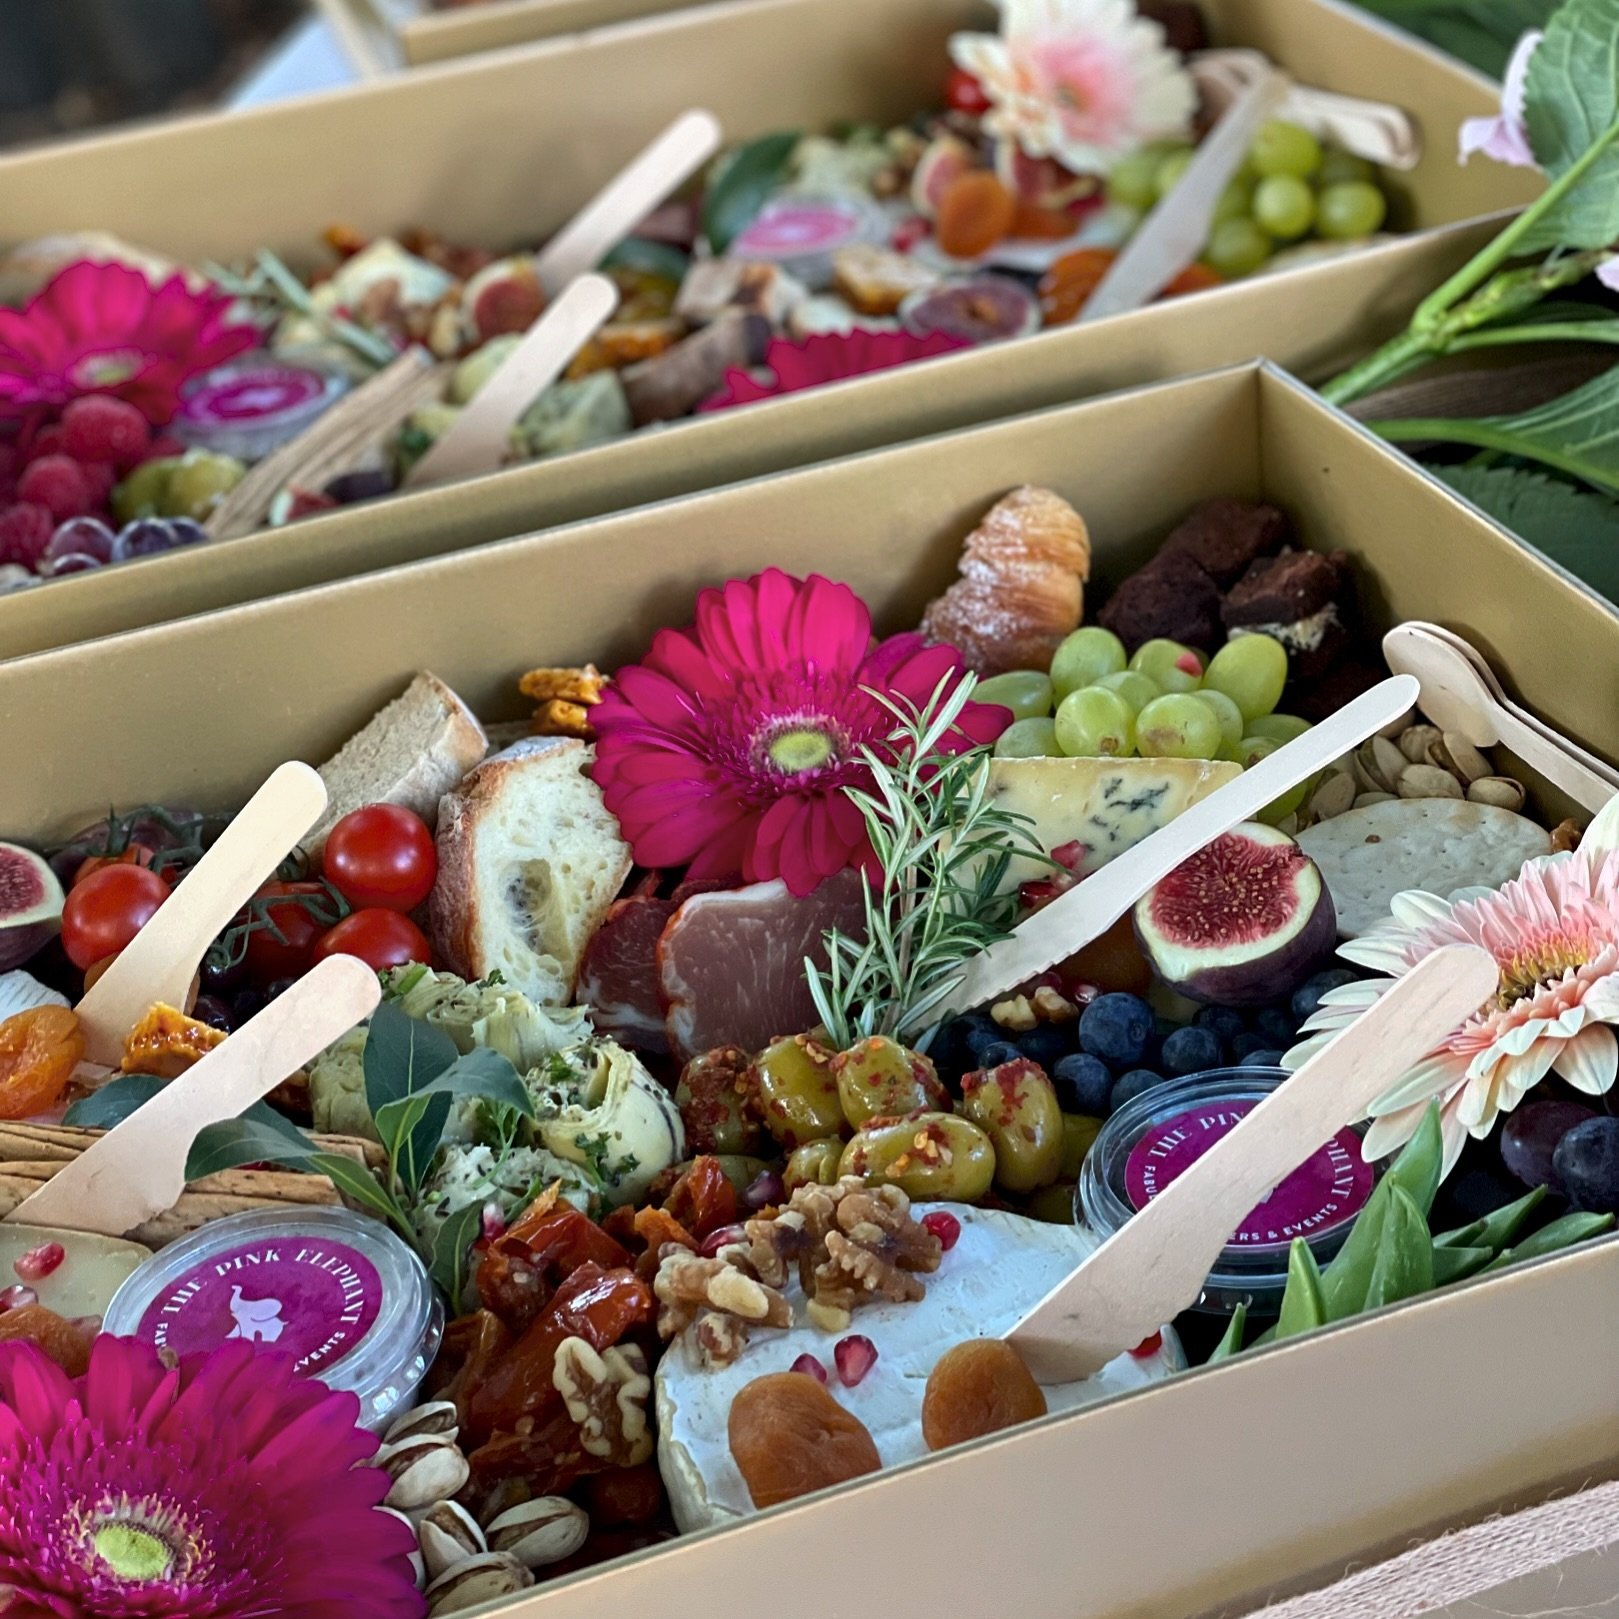 Our Summer Platter Boxes are back and we are ready for a busy summer ahead. Our platter boxes can be styled to suit any occasion be it a gathering with friends, family or even your corporate picnic day!

These can be ordered directly through the plat